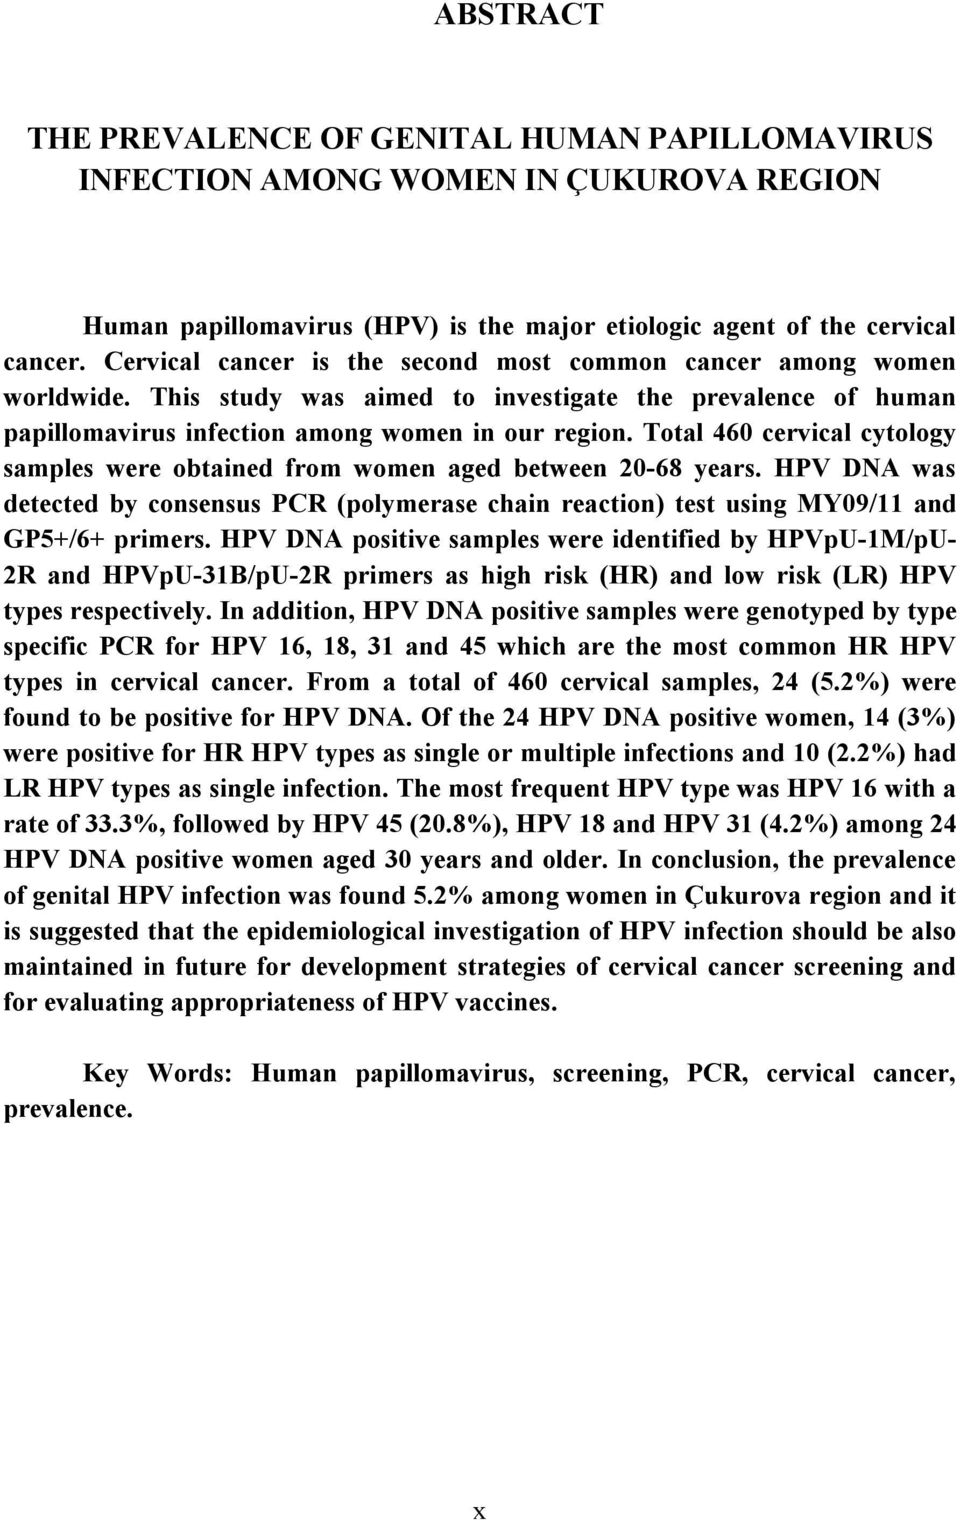 Total 460 cervical cytology samples were obtained from women aged between 20-68 years. HPV DNA was detected by consensus PCR (polymerase chain reaction) test using MY09/11 and GP5+/6+ primers.